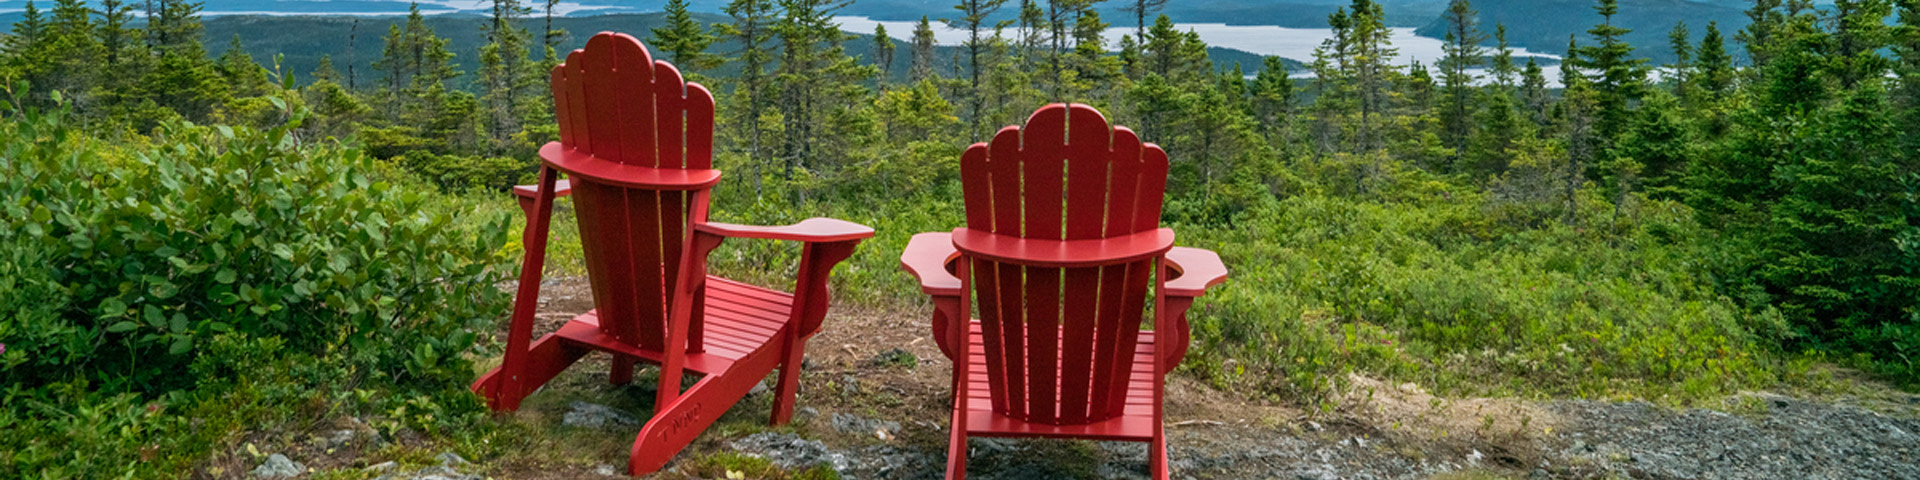 two red Adirondack chairs overlooking a forested coastal scene